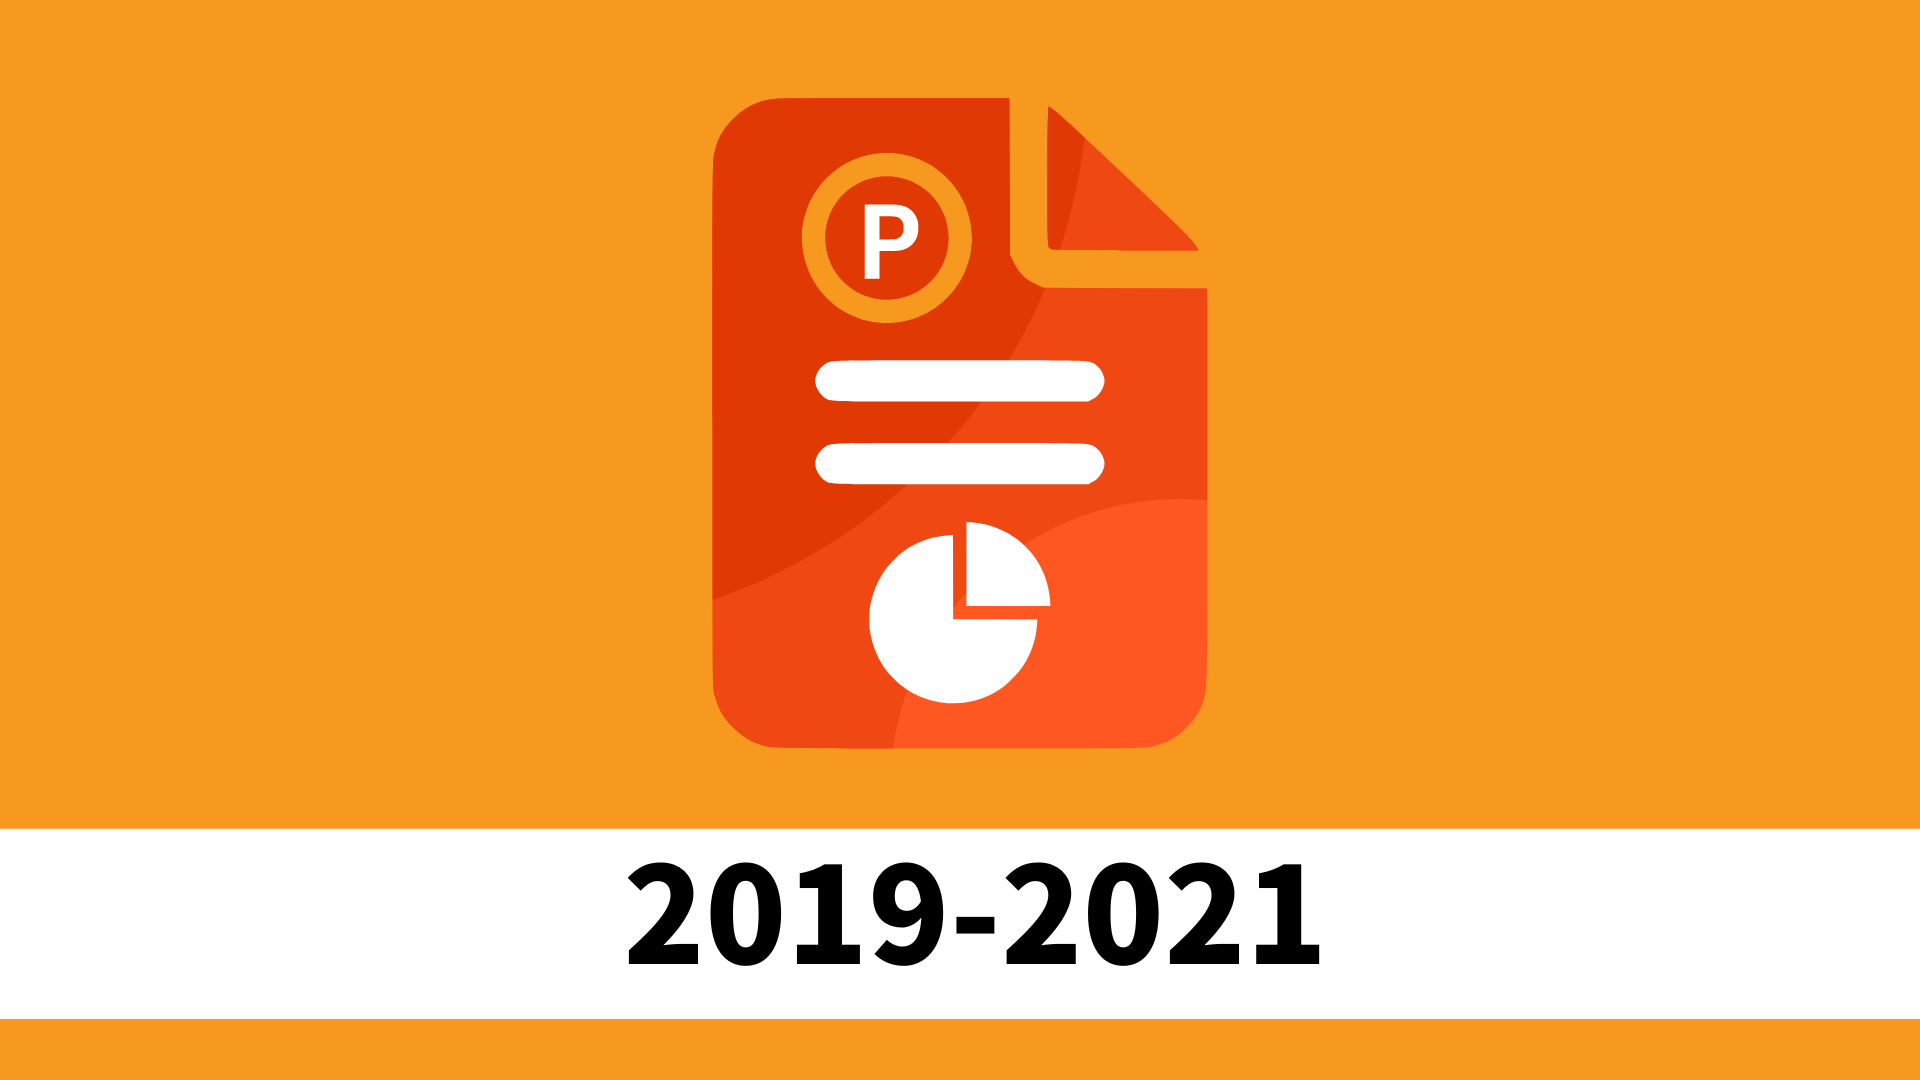 PowerPoint 2019-2021 Learning（入門から活用まで）課題演習つき